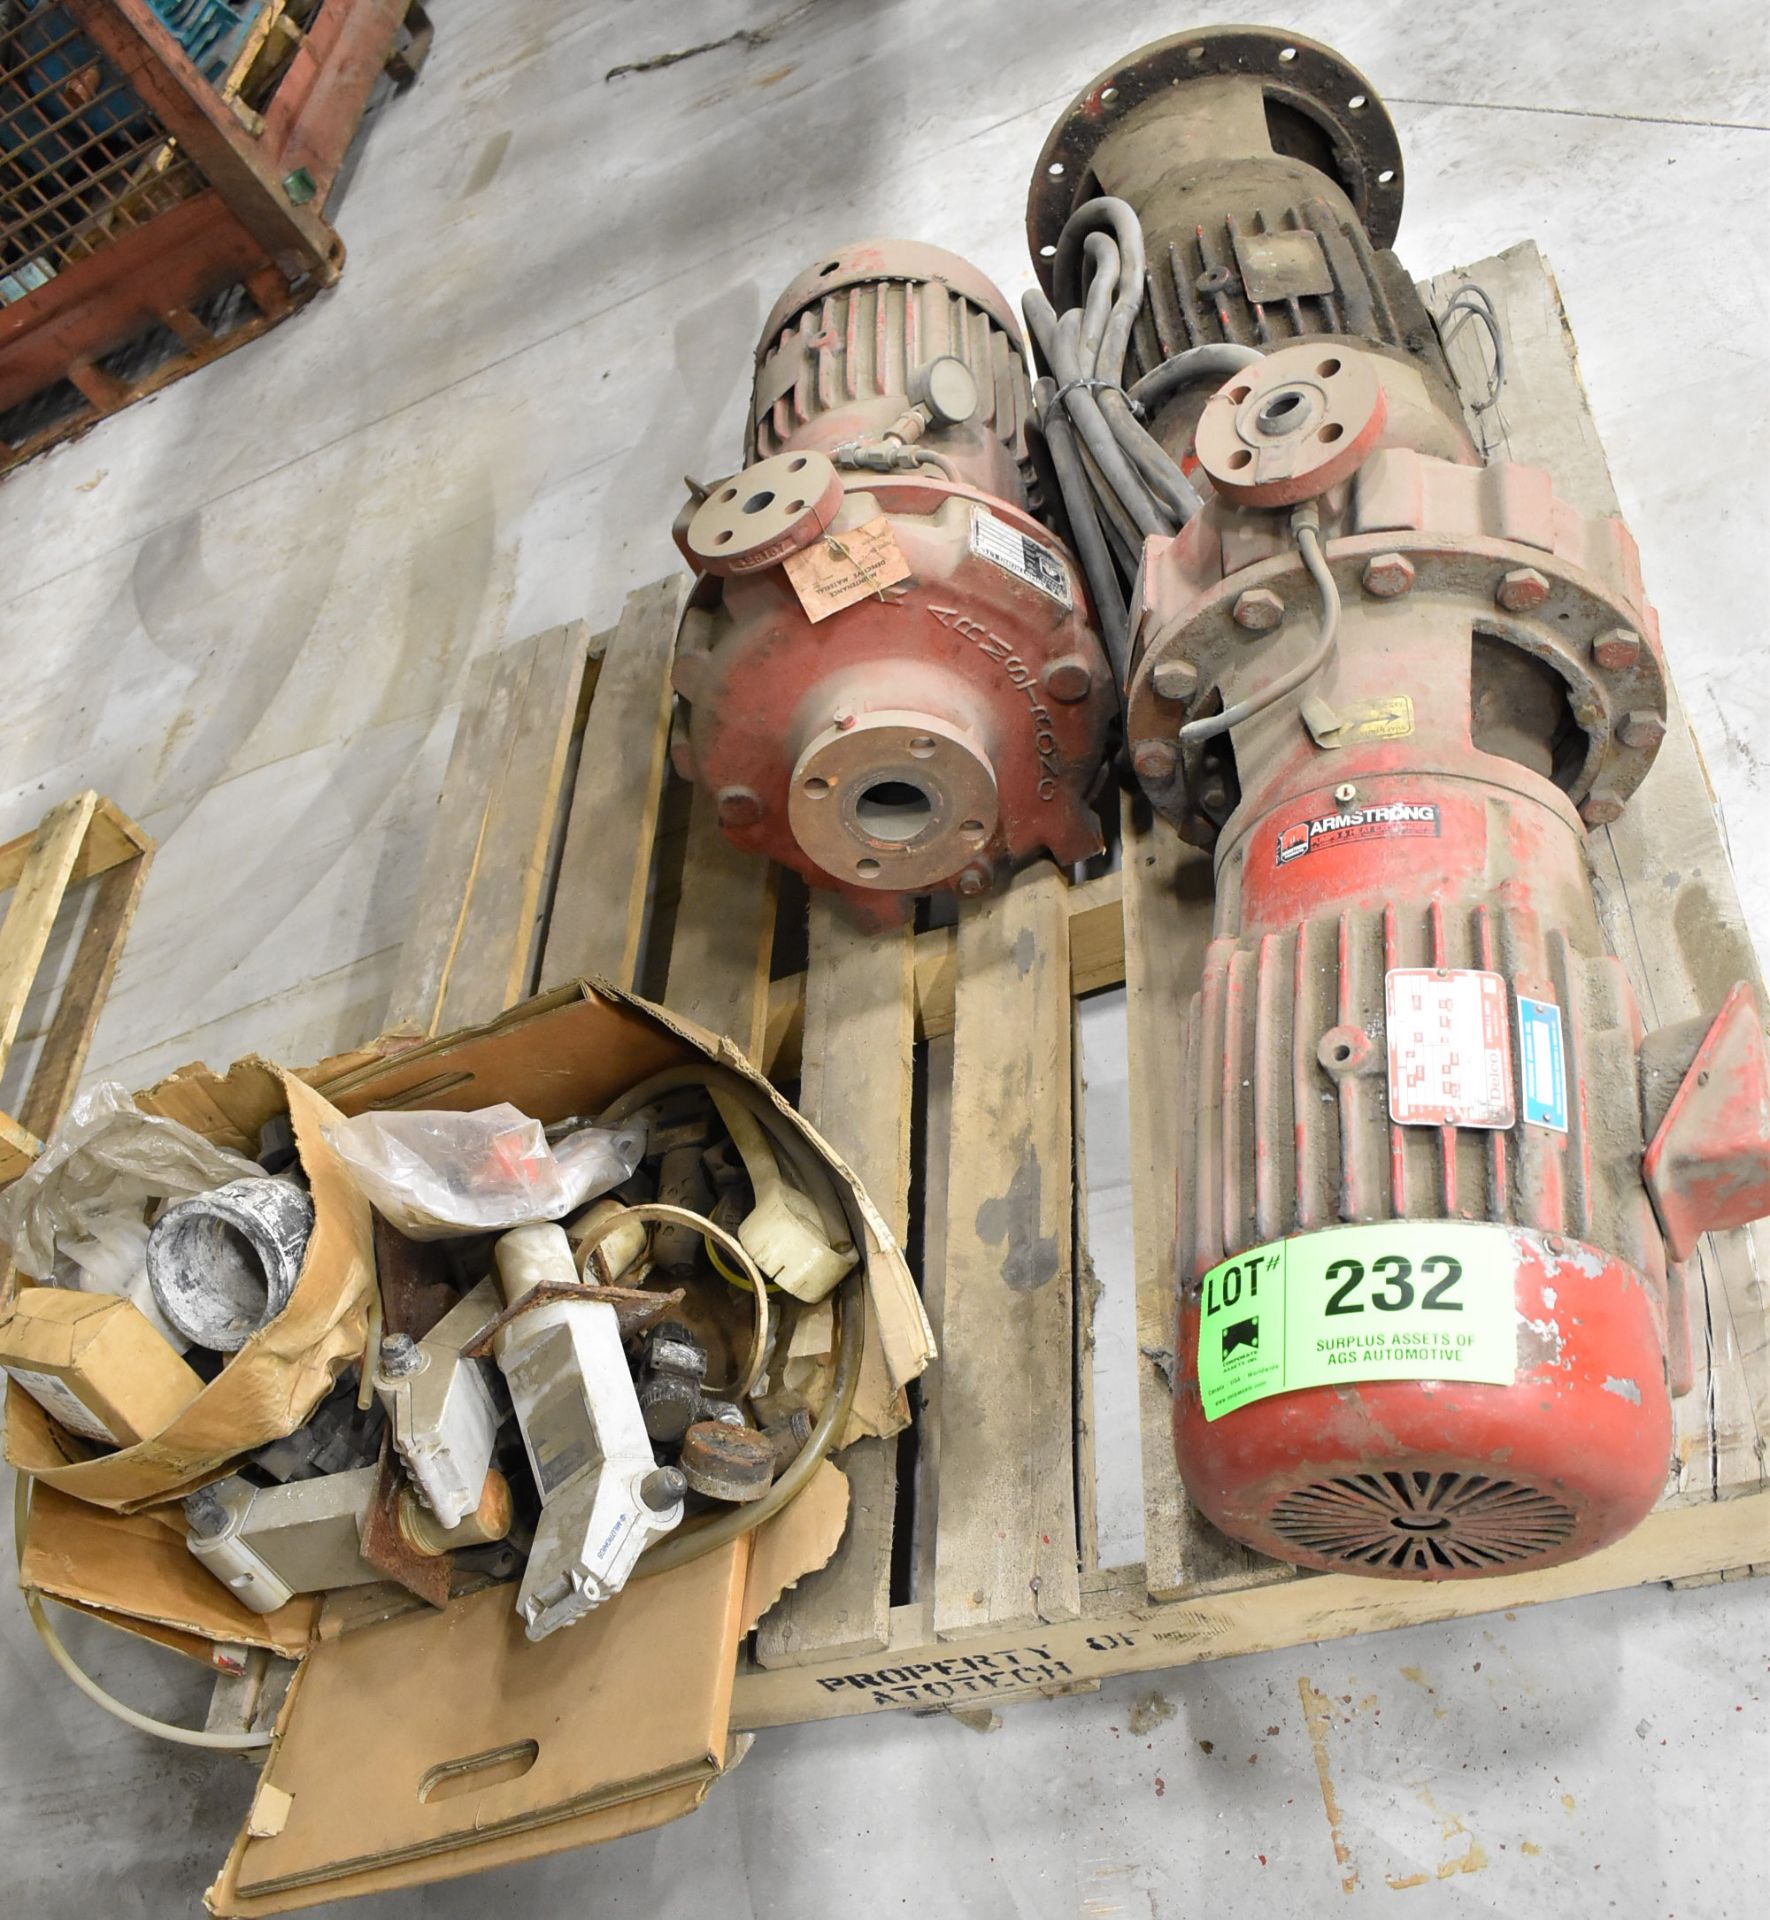 LOT/ (3) 3 HP ELECTRIC MOTORS, (2) ARMSTRONG 2X1X10 42P PUMPS, BOX WITH PROBE ACCESSORIES (CI)